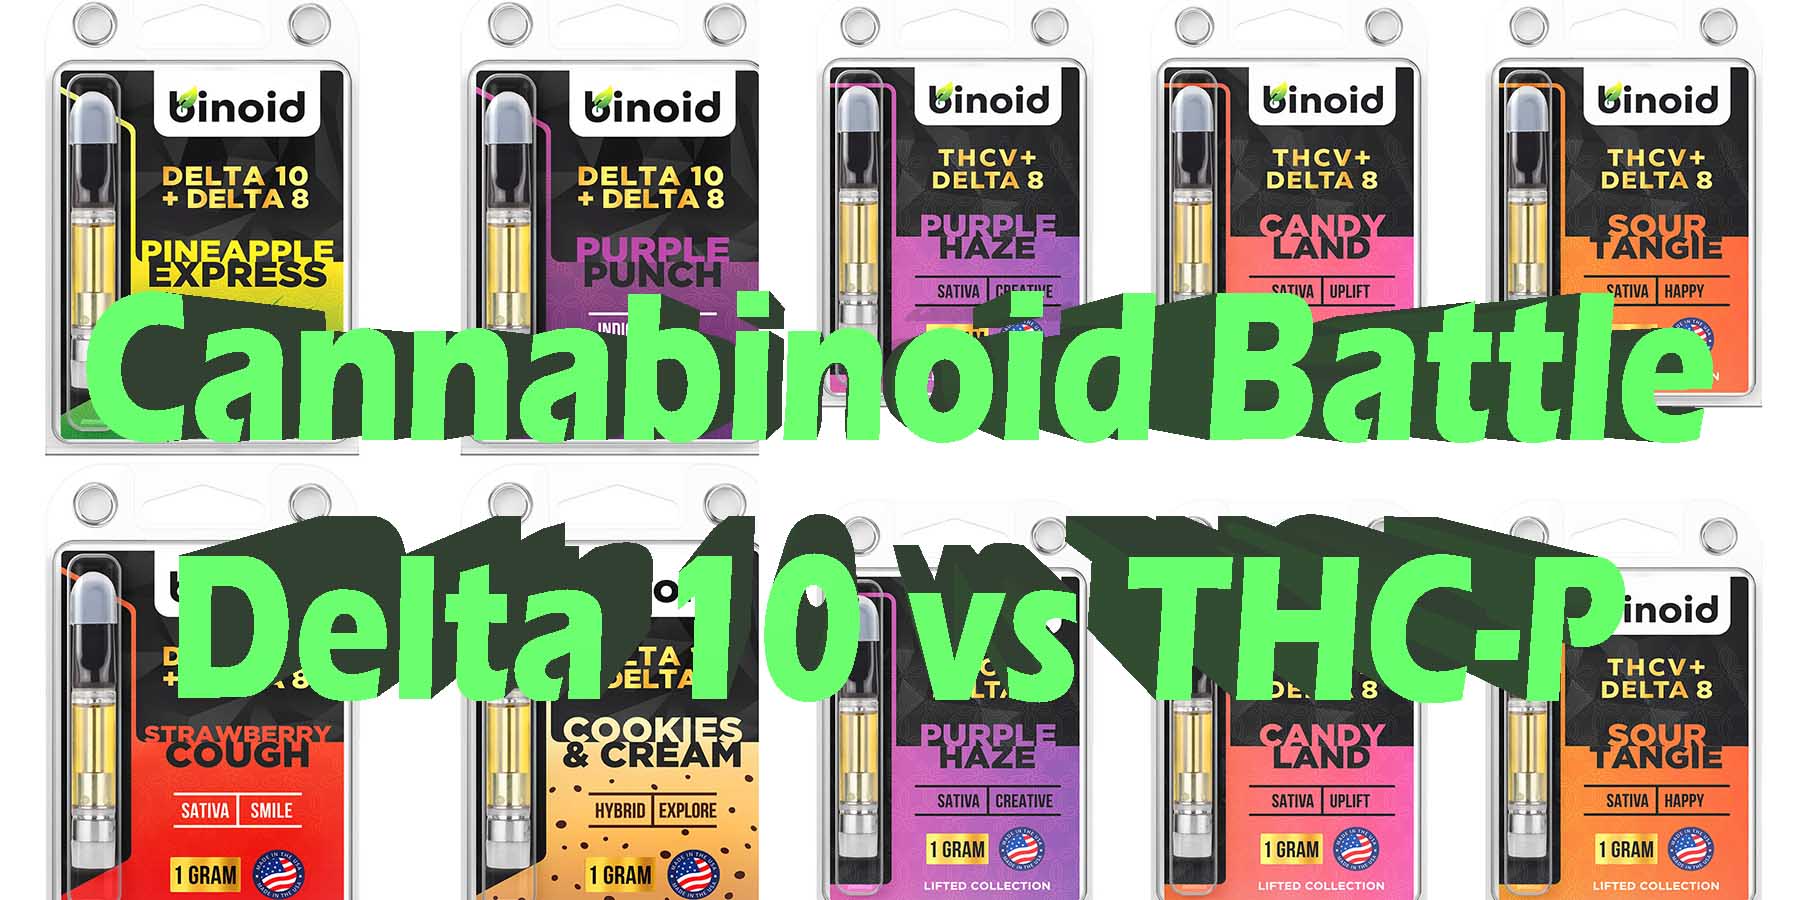 Cannabinoid Battle Delta 10 vs Thc-p WhereToGet HowToGetNearMe BestPlace LowestPrice Coupon Discount For Smoking Best High Smoke Shop Online Near Me Binoid